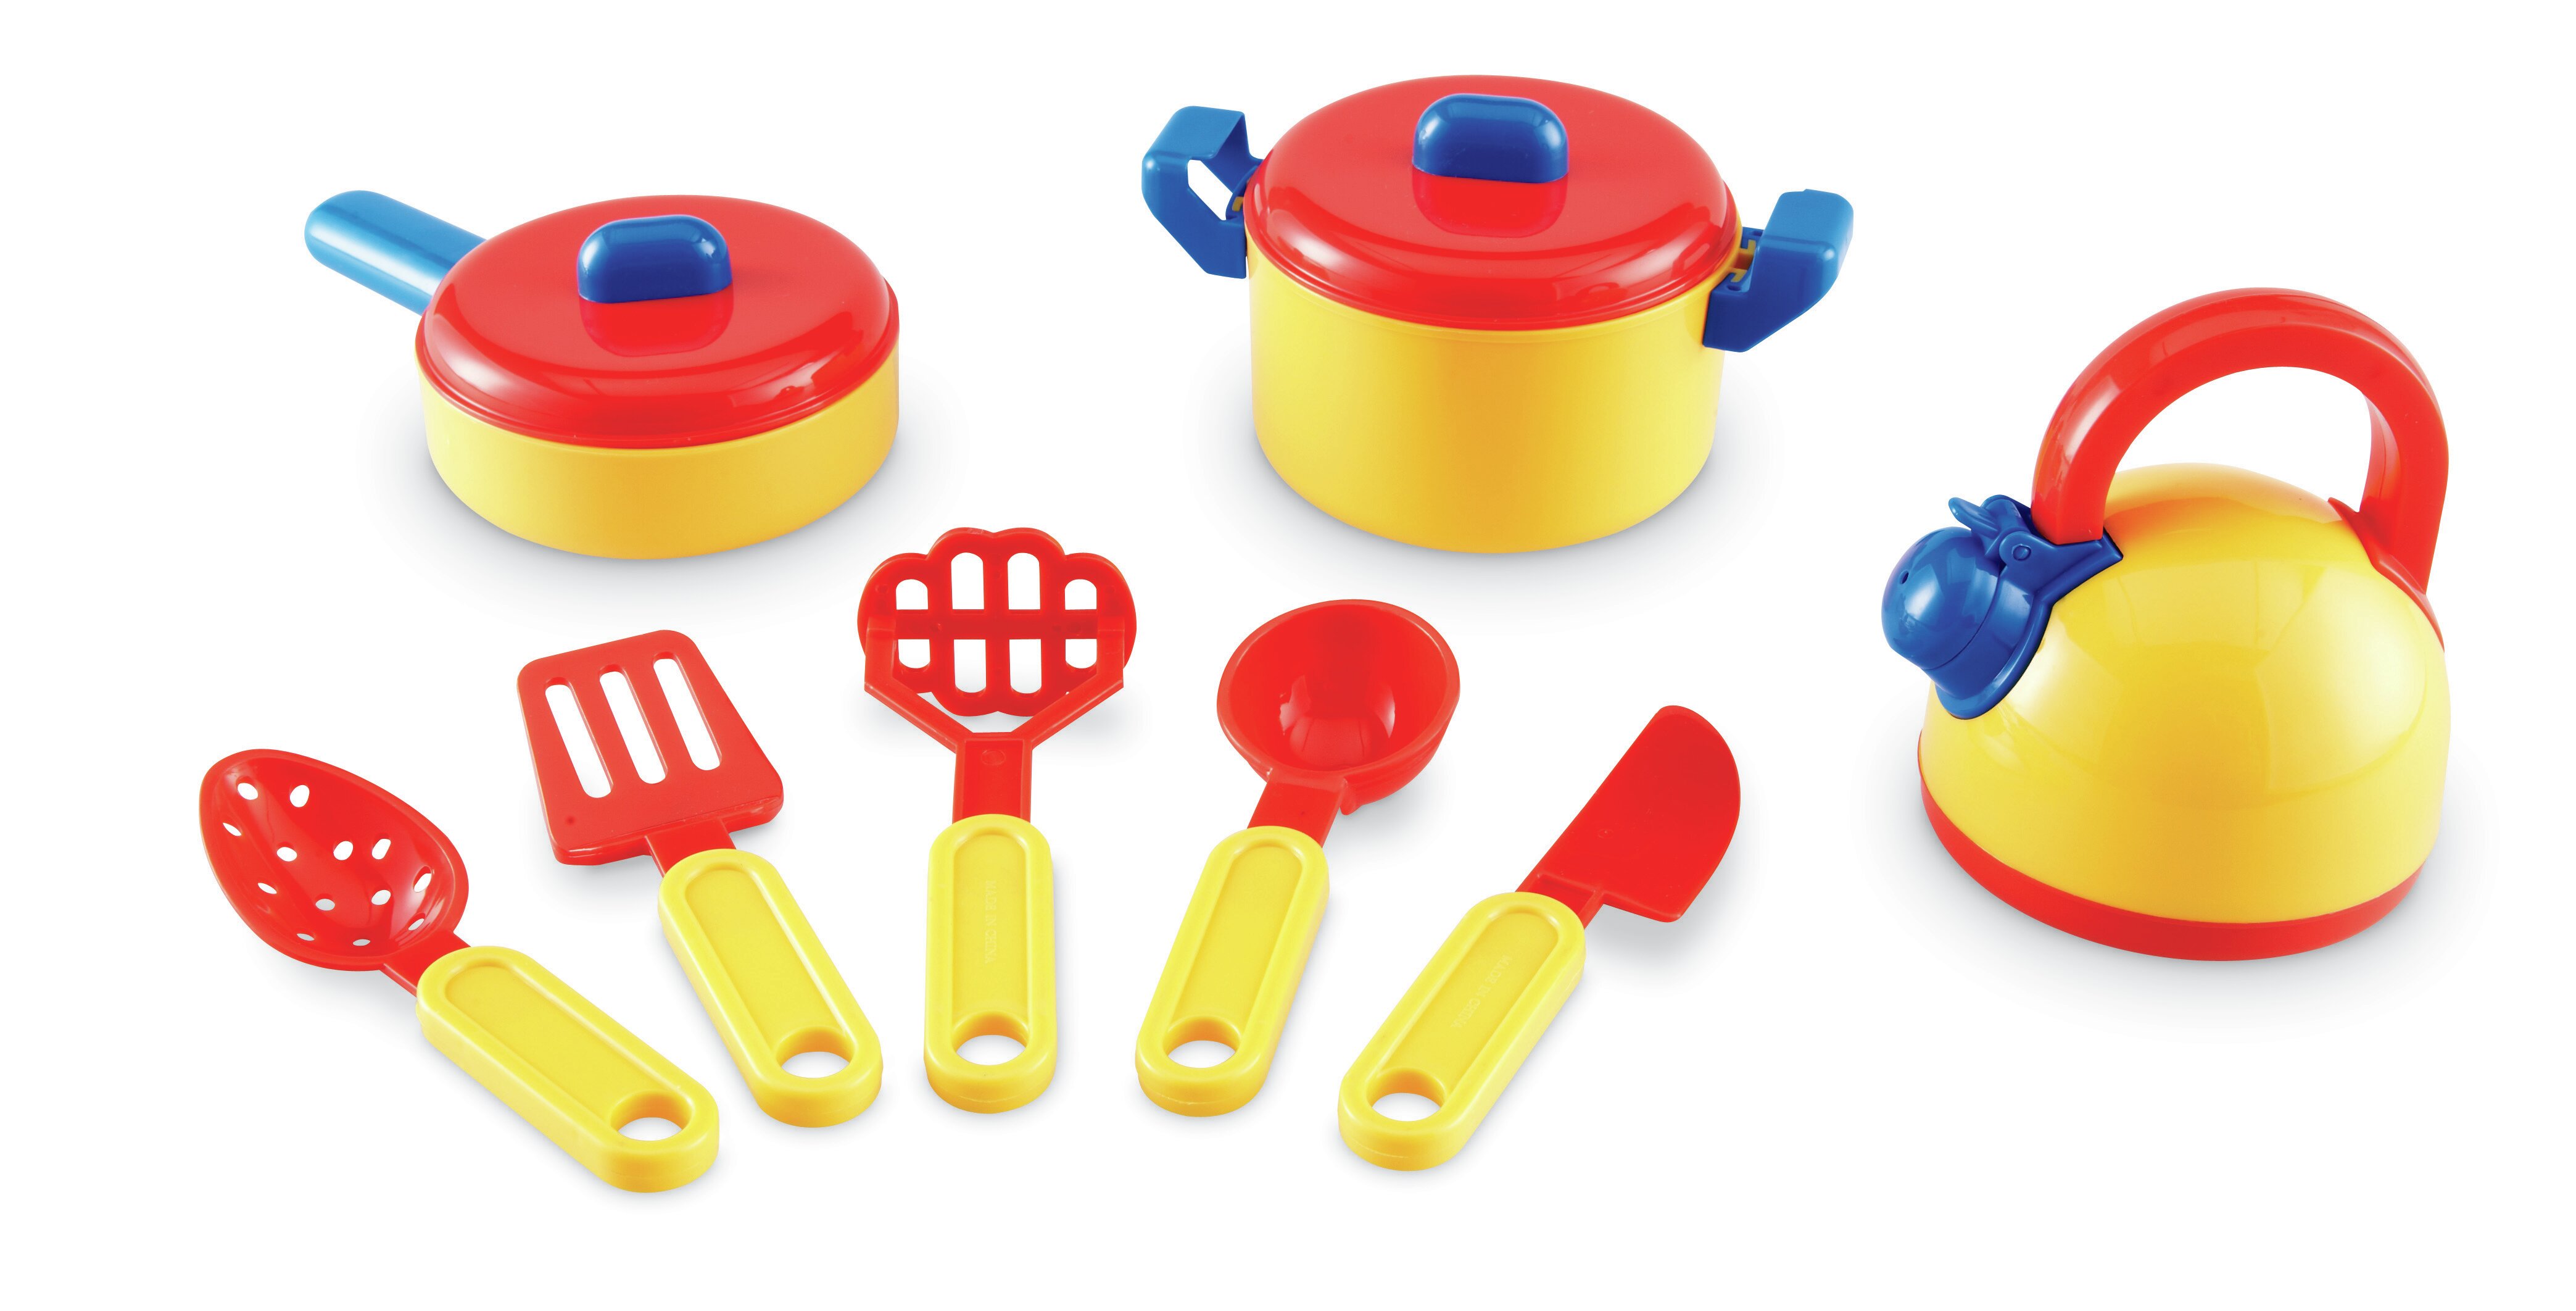 My Play Wooden Toy Pot & Pan Set Kids Children Kitchen Role Play Gift 10pc Kit 